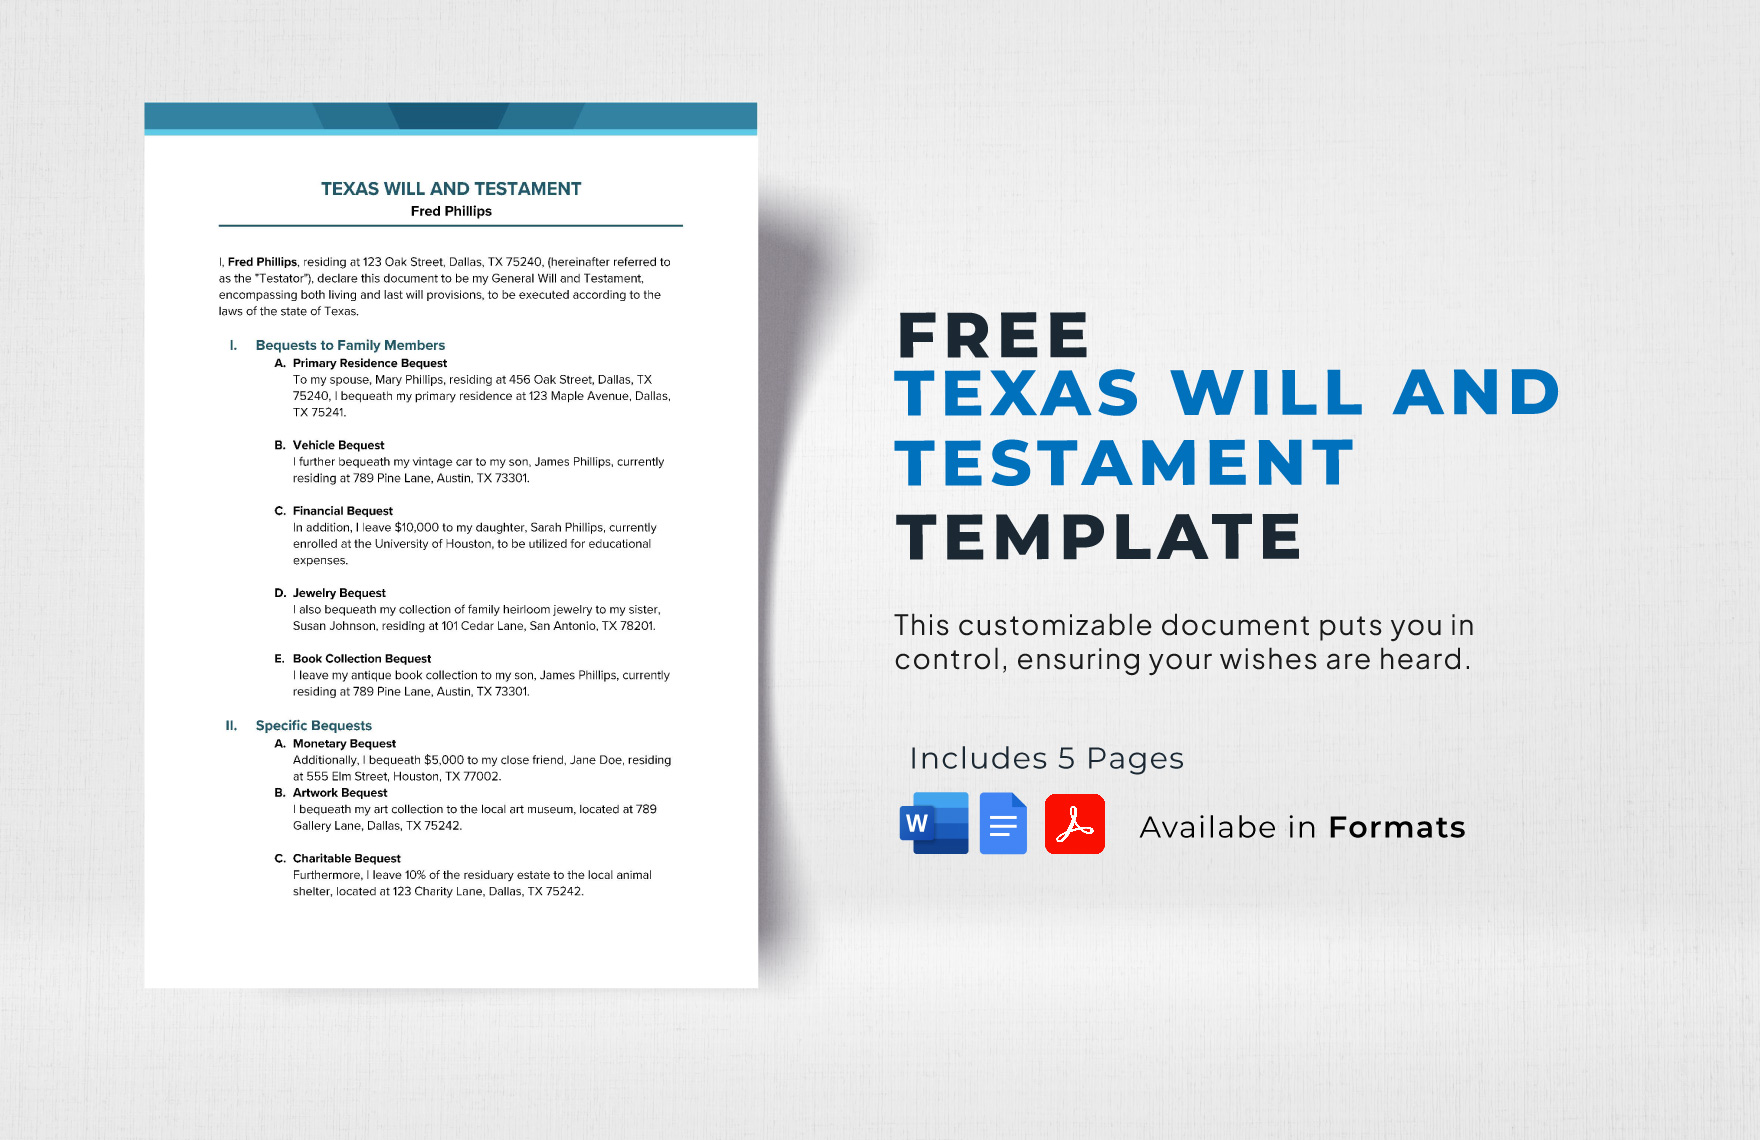 Texas Will and Testament Template